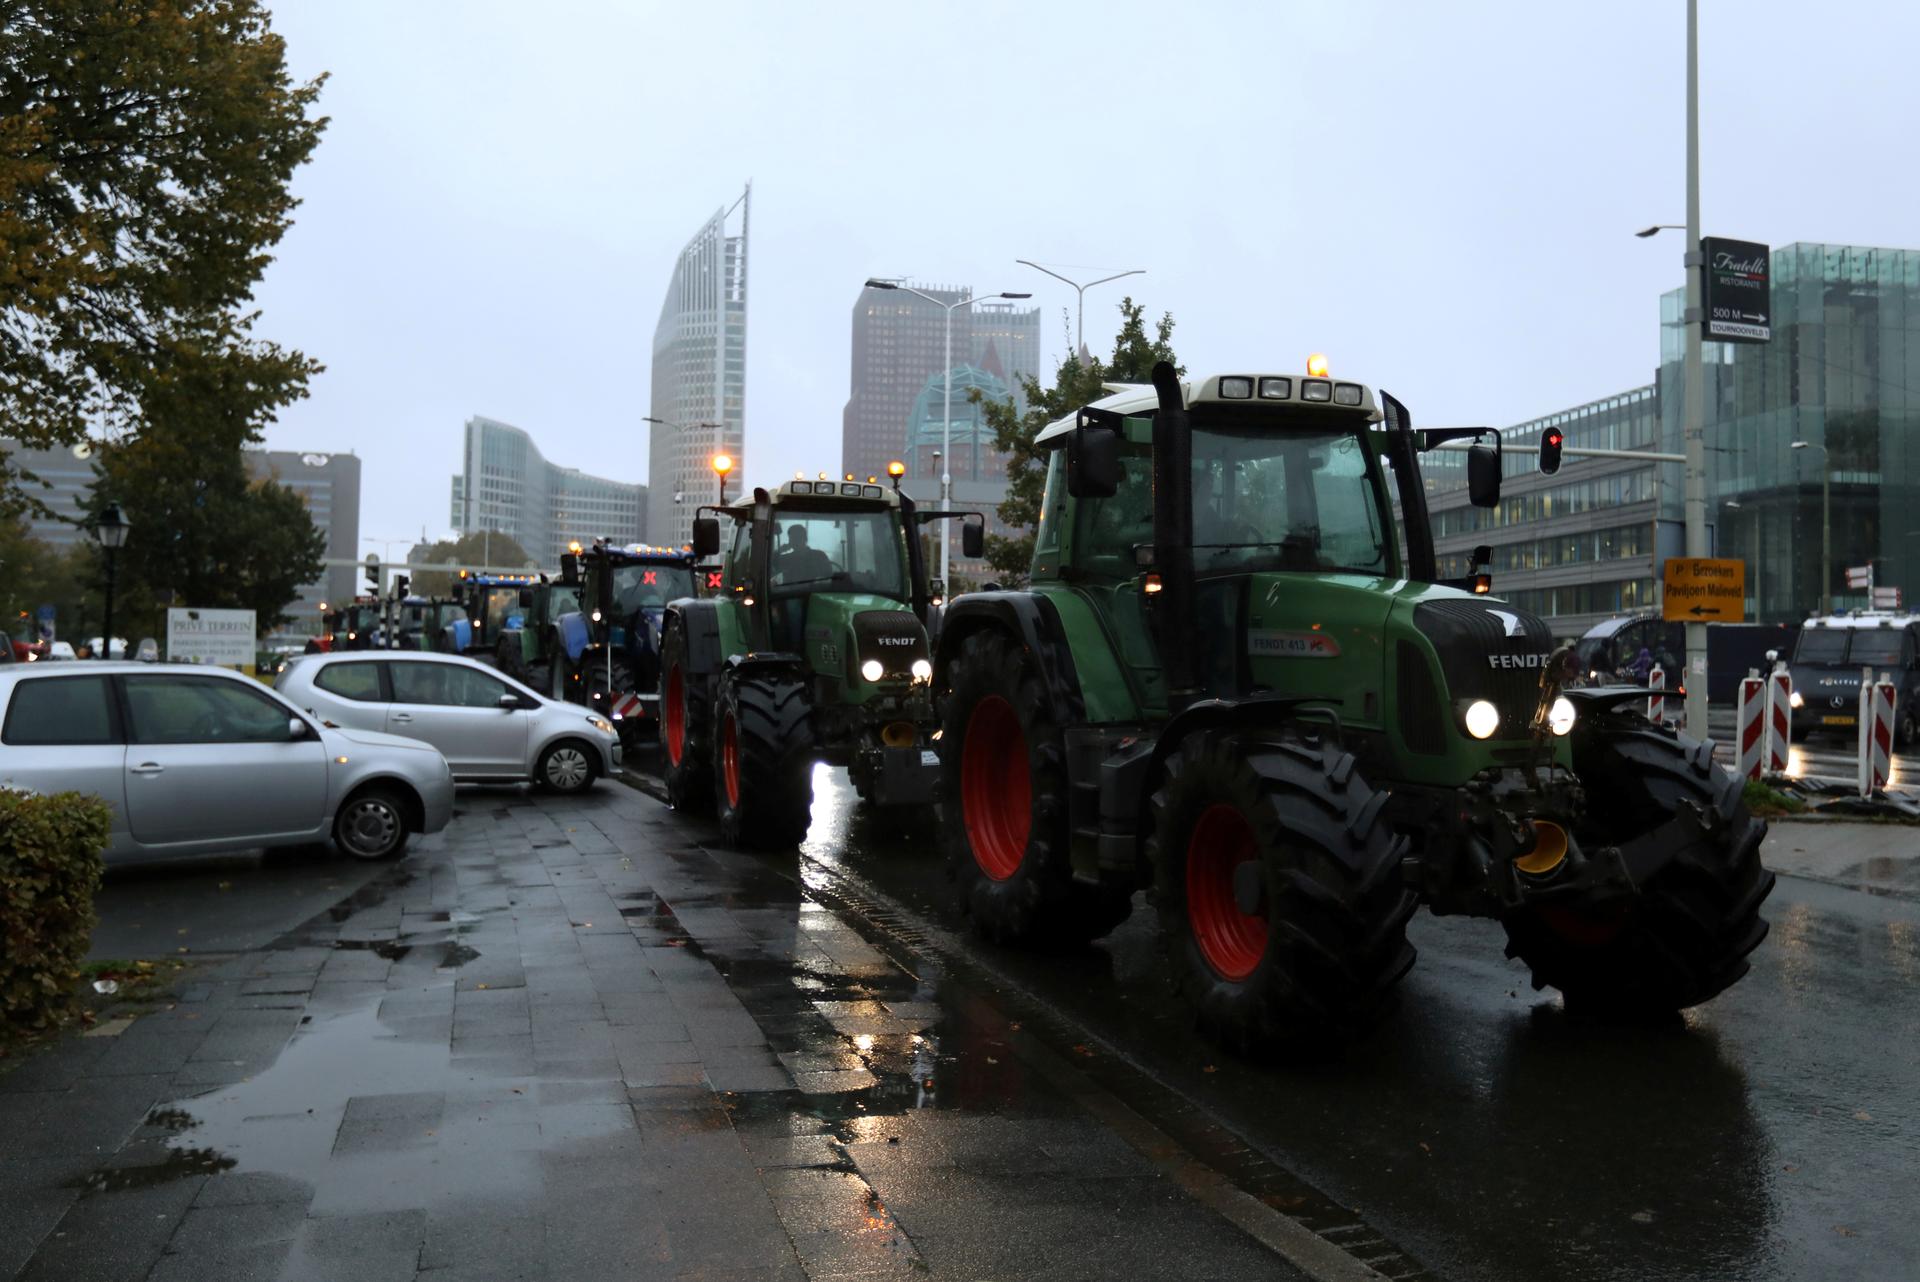 Dutch police detain about 50 farmers protesting over pollution rules